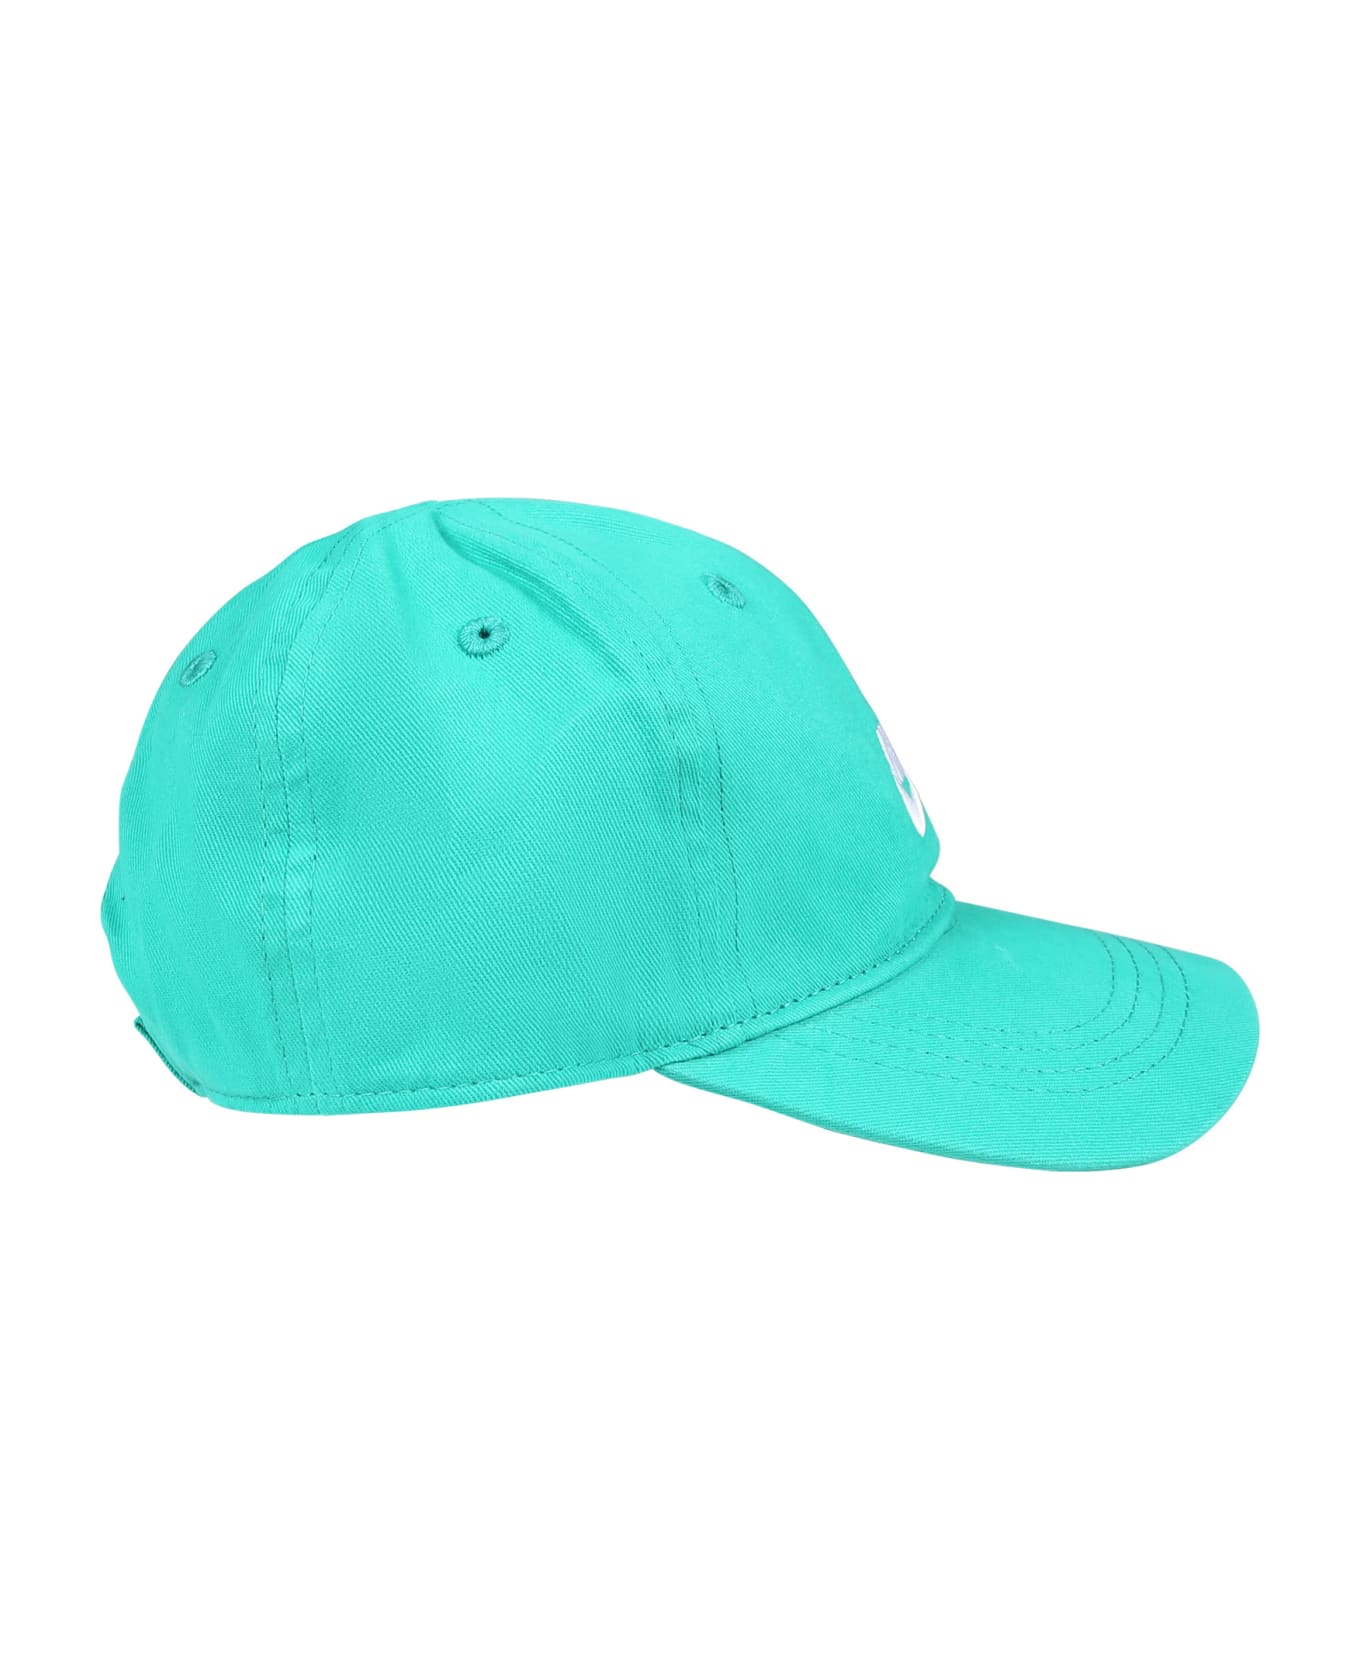 Nike Green Hat With Visor For Kids With The Iconic Swoosh - Green アクセサリー＆ギフト